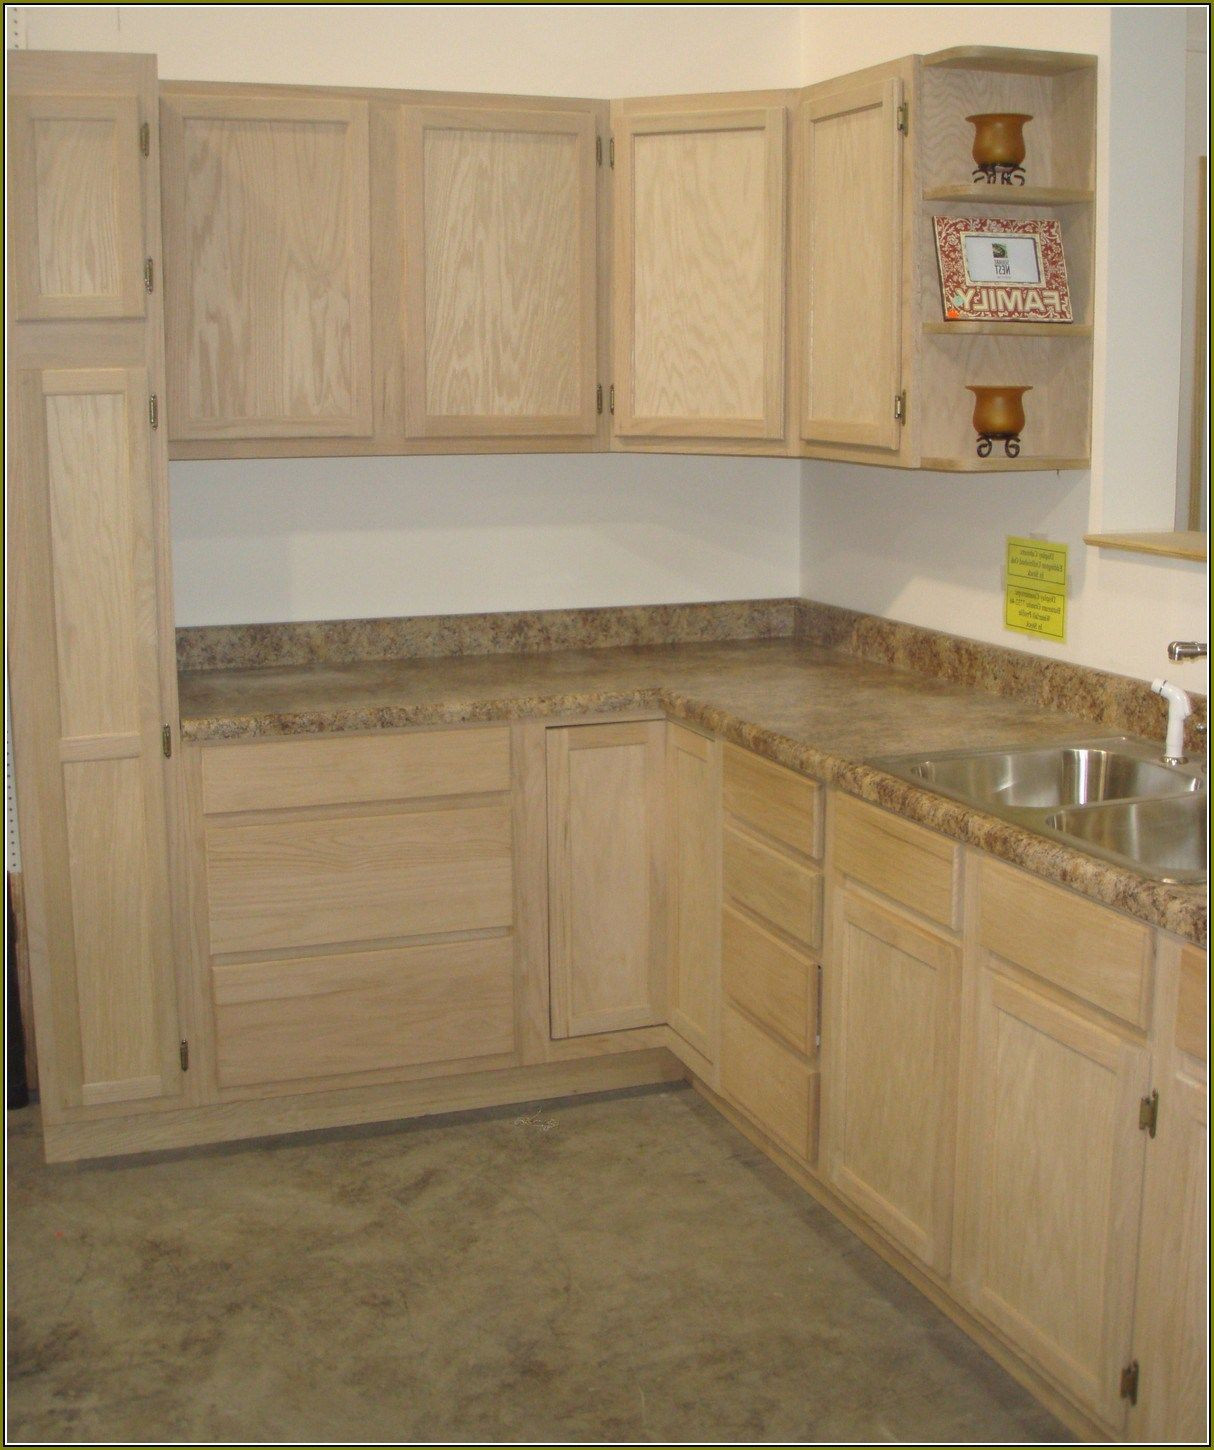 Lowes Unfinished Kitchen Cabinets Awesome Lowes Unfinished Kitchen Cabinets In Stock Of Lowes Unfinished Kitchen Cabinets 